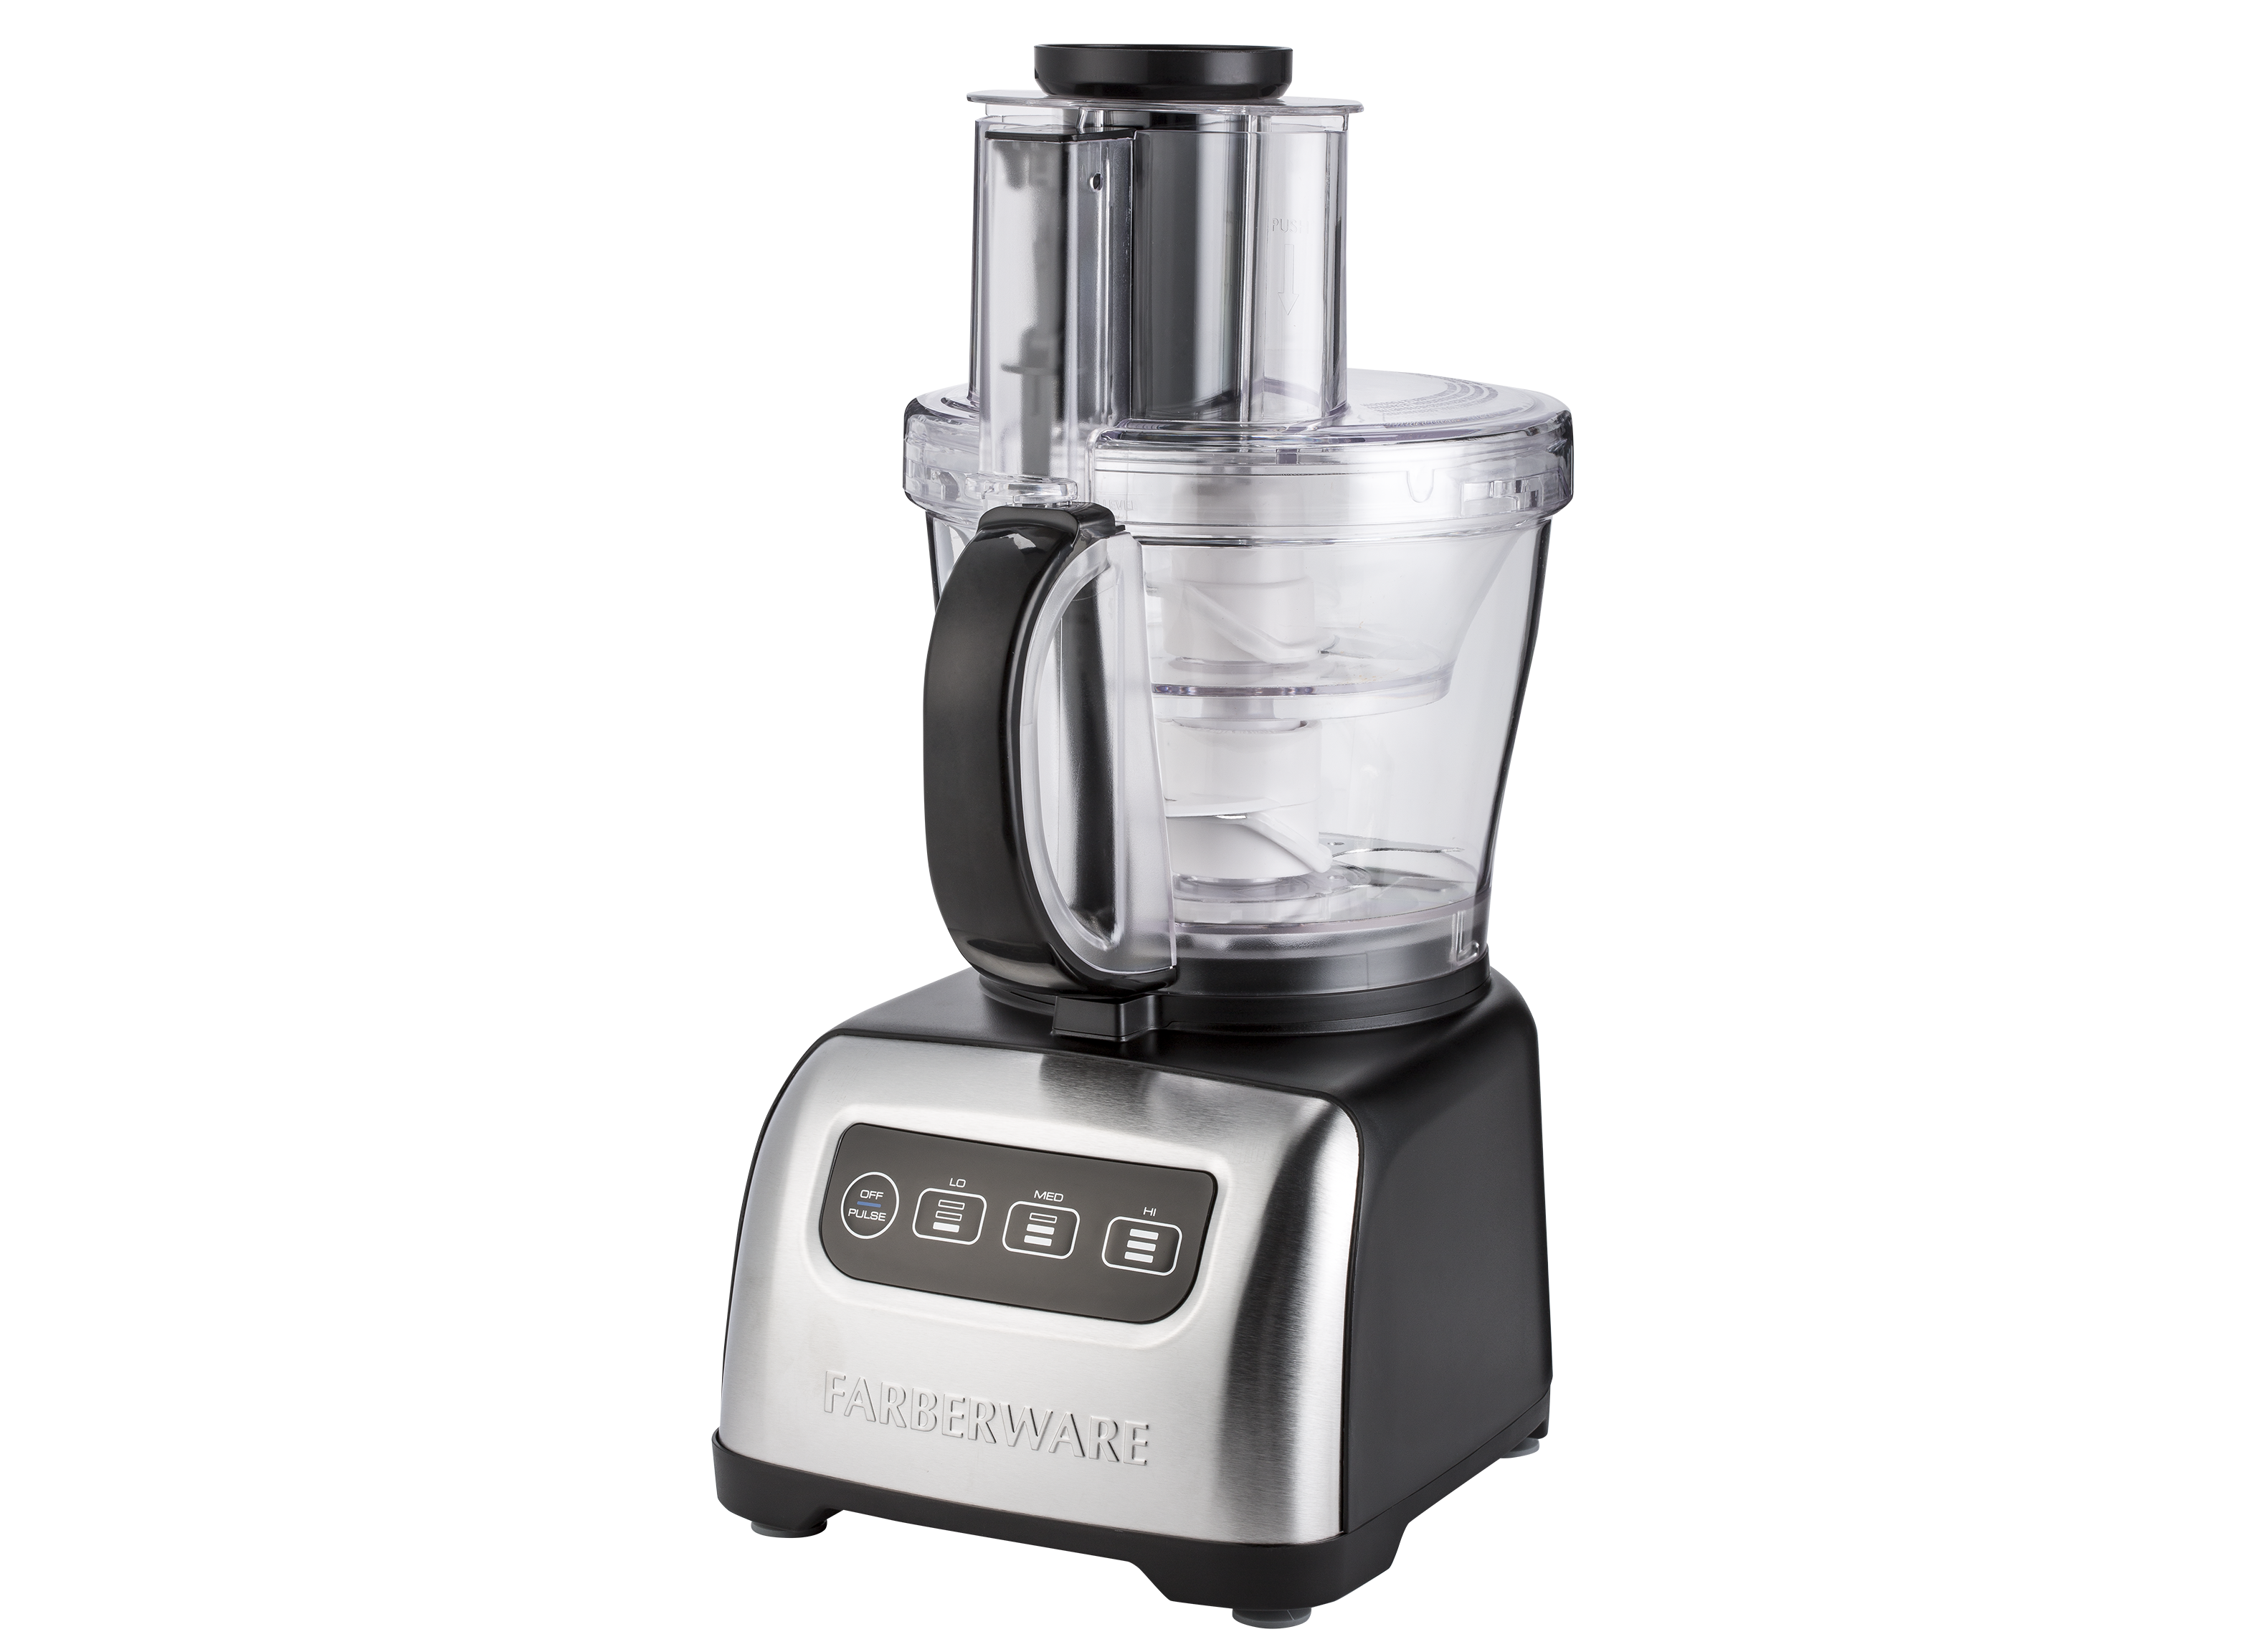 Farberware 4 Cup Food Processor with Stainless Steel Blade